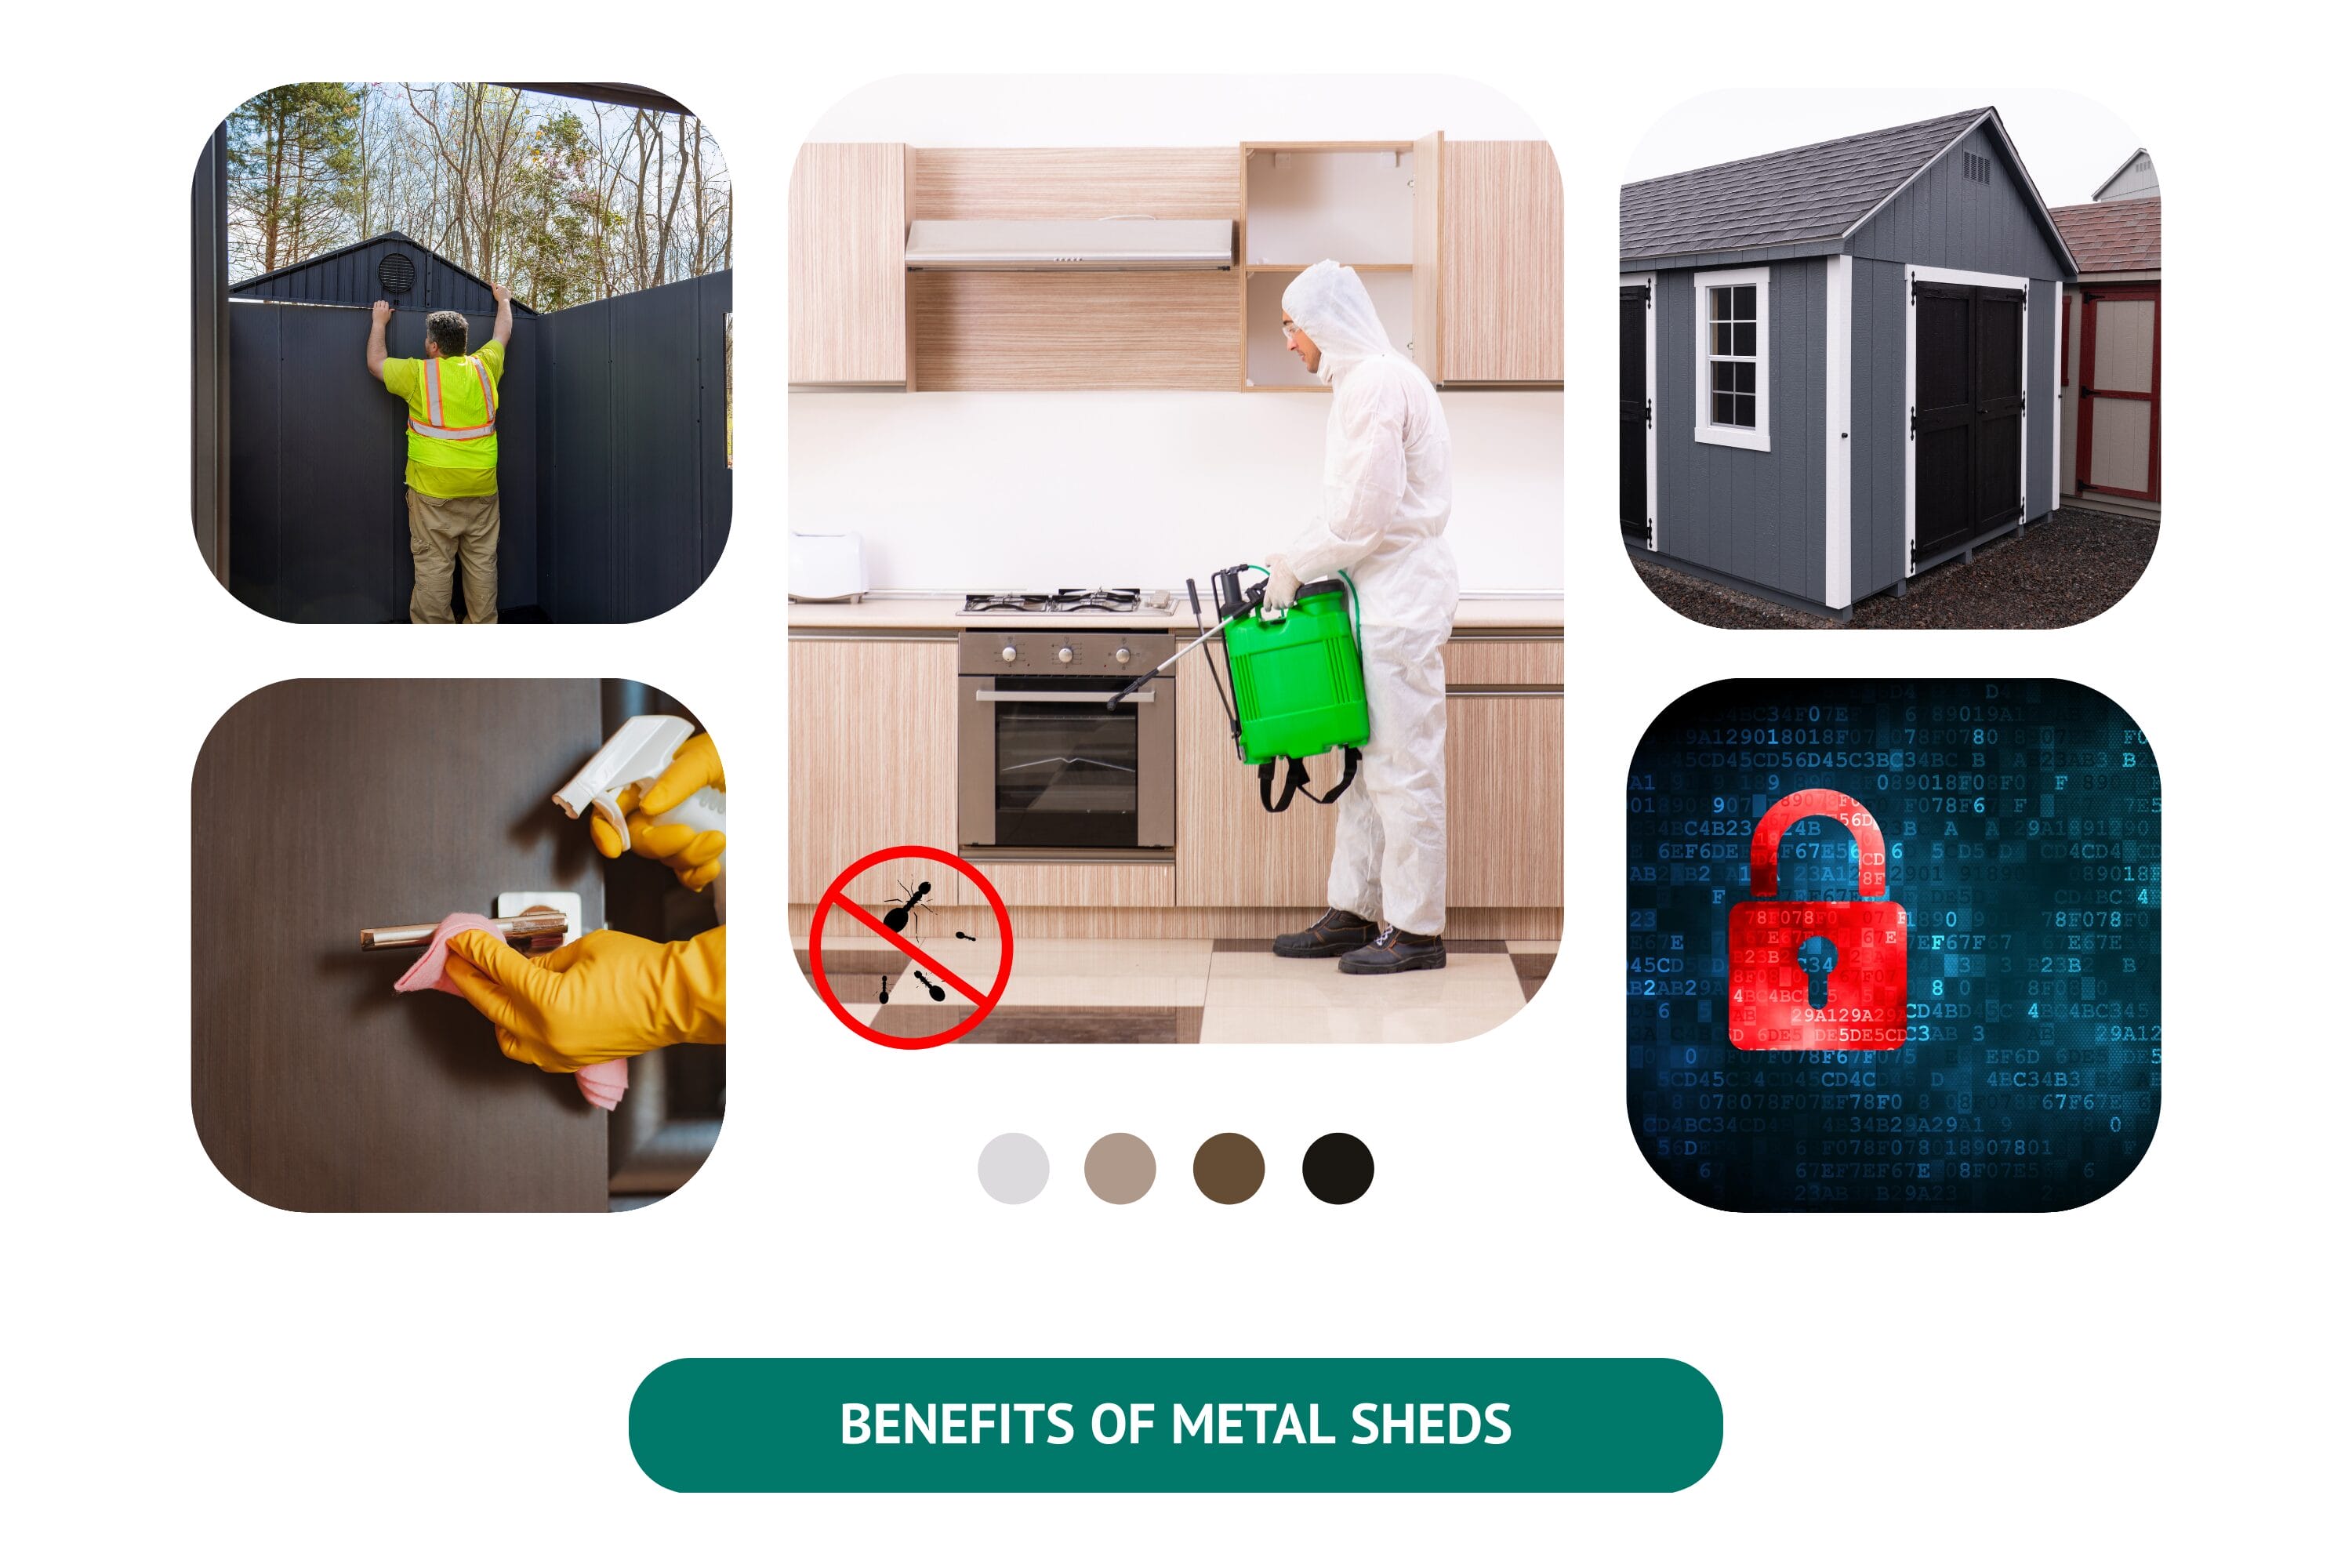 Advantages of Using Metal Sheds